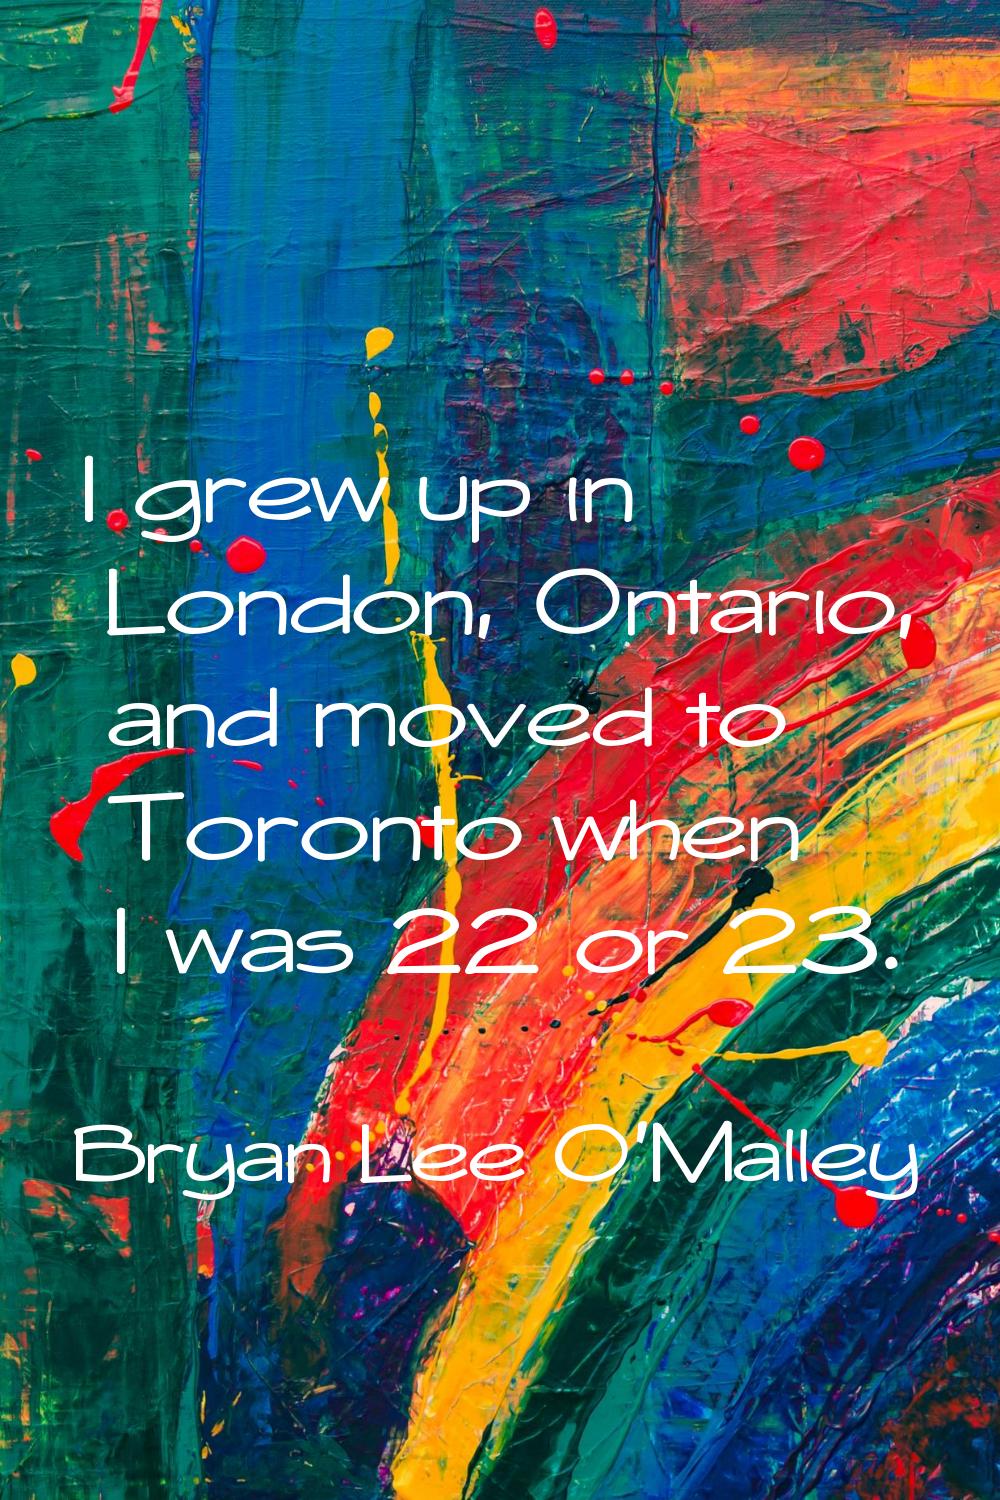 I grew up in London, Ontario, and moved to Toronto when I was 22 or 23.